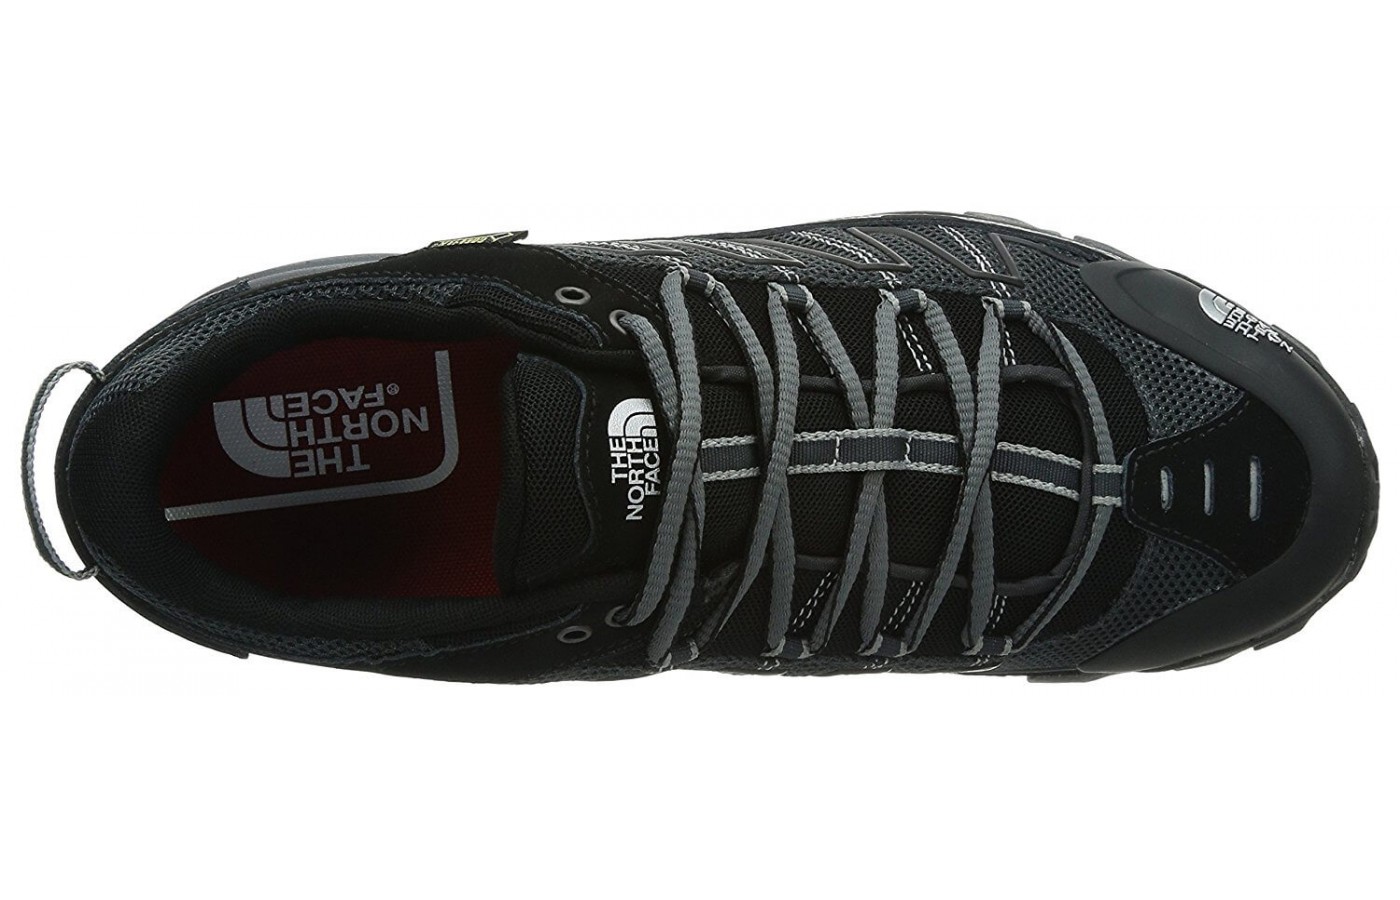 The The North Face Ultra 110 GTX has a Goretex waterproof membrane